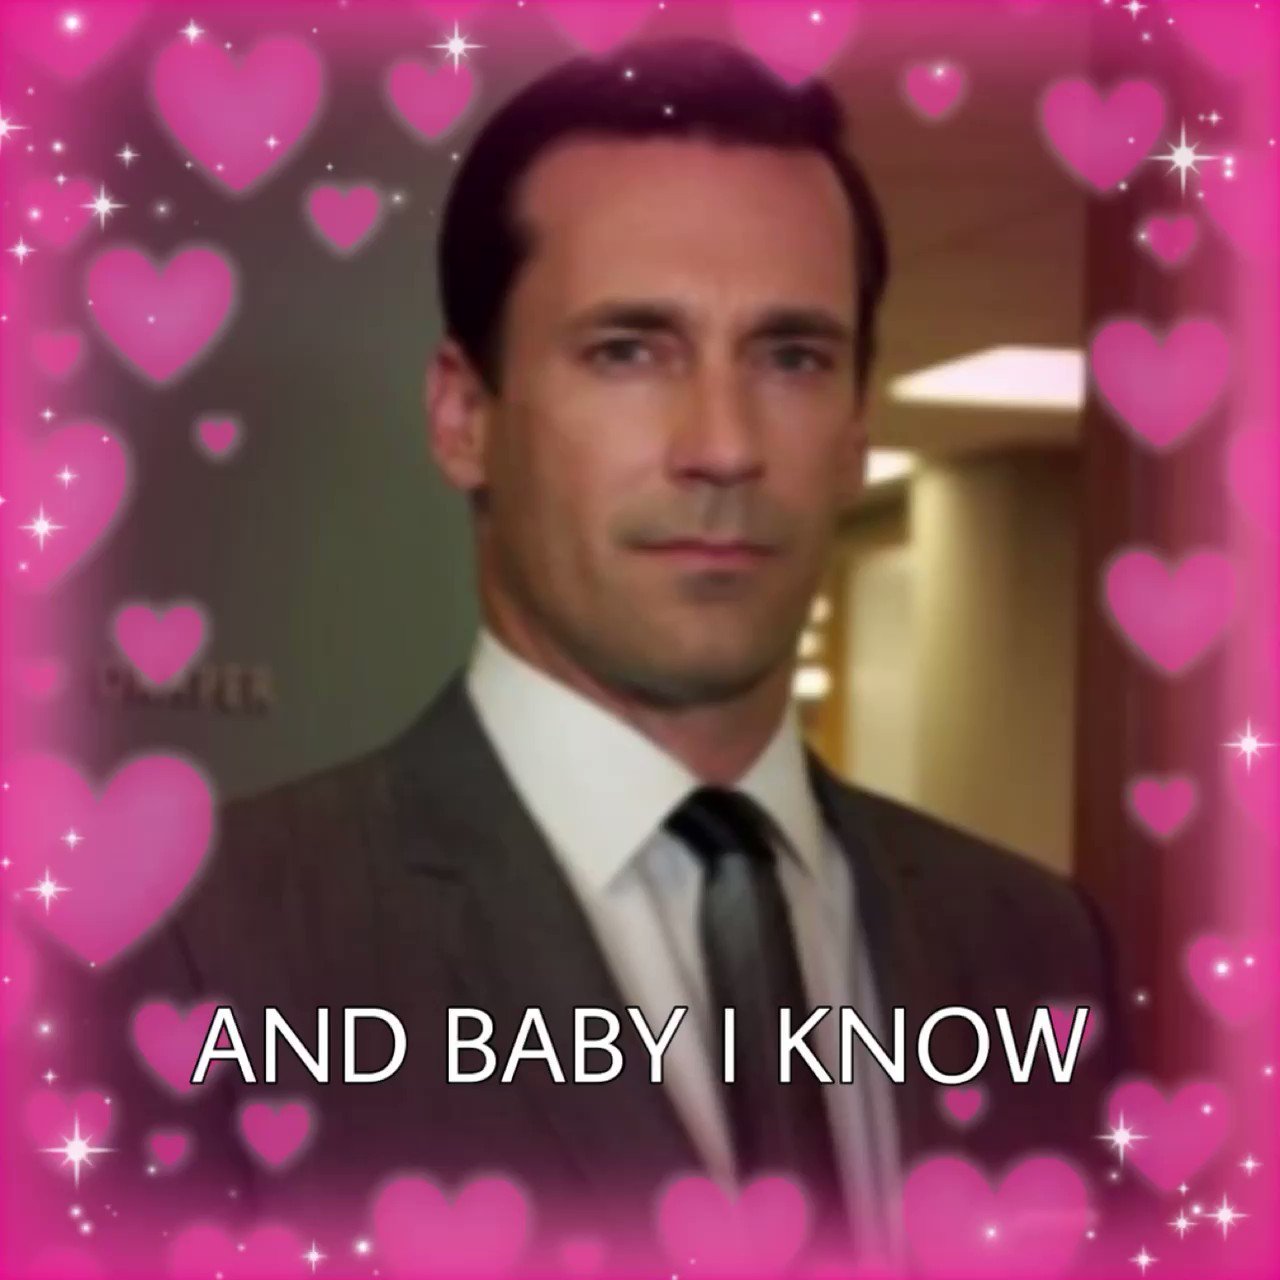 Happy birthday jon hamm you will never know what you\ve done for the babygirlification movement 